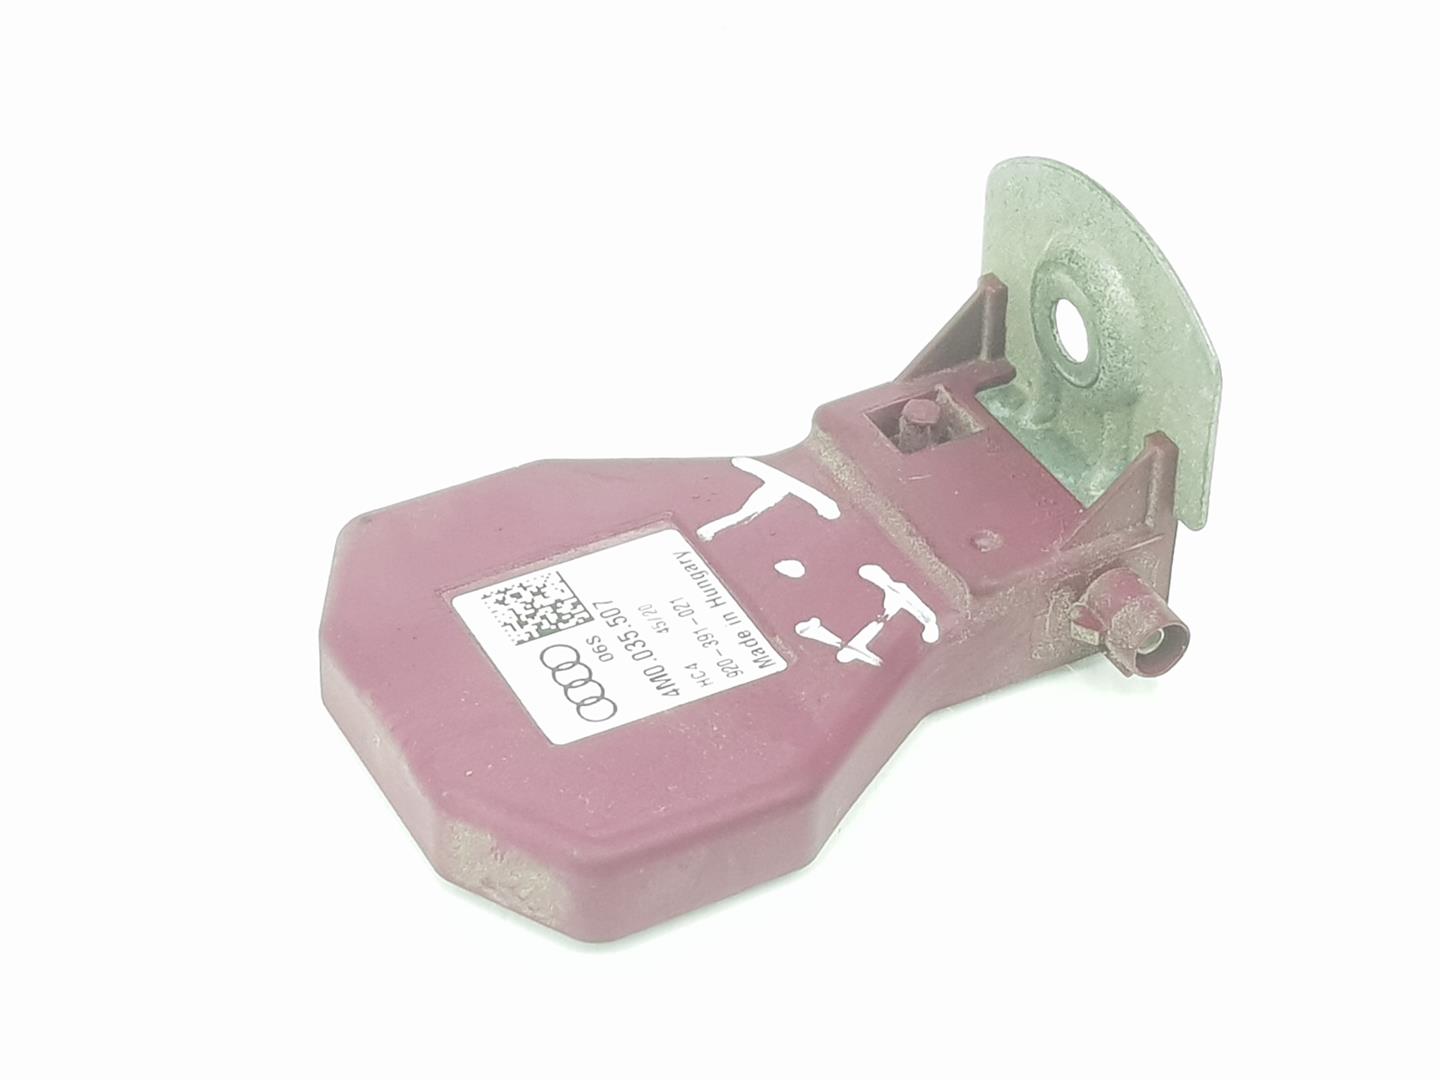 SEAT Alhambra 2 generation (2010-2021) Other Control Units 4M0035507, 4M0035507 23753522